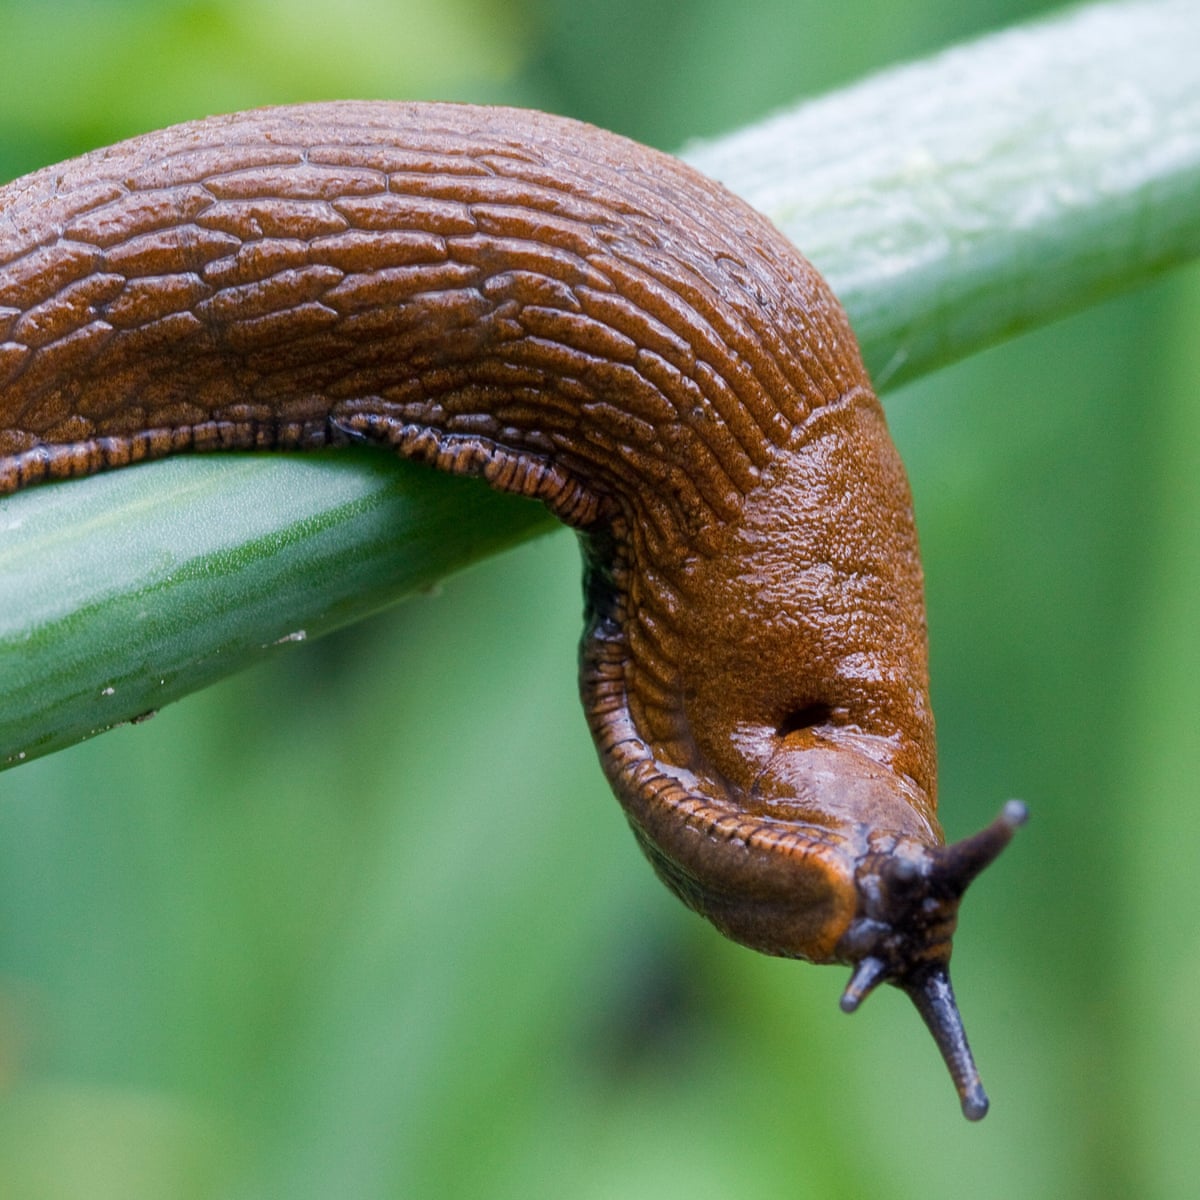 What are slugs and what is their purpose?